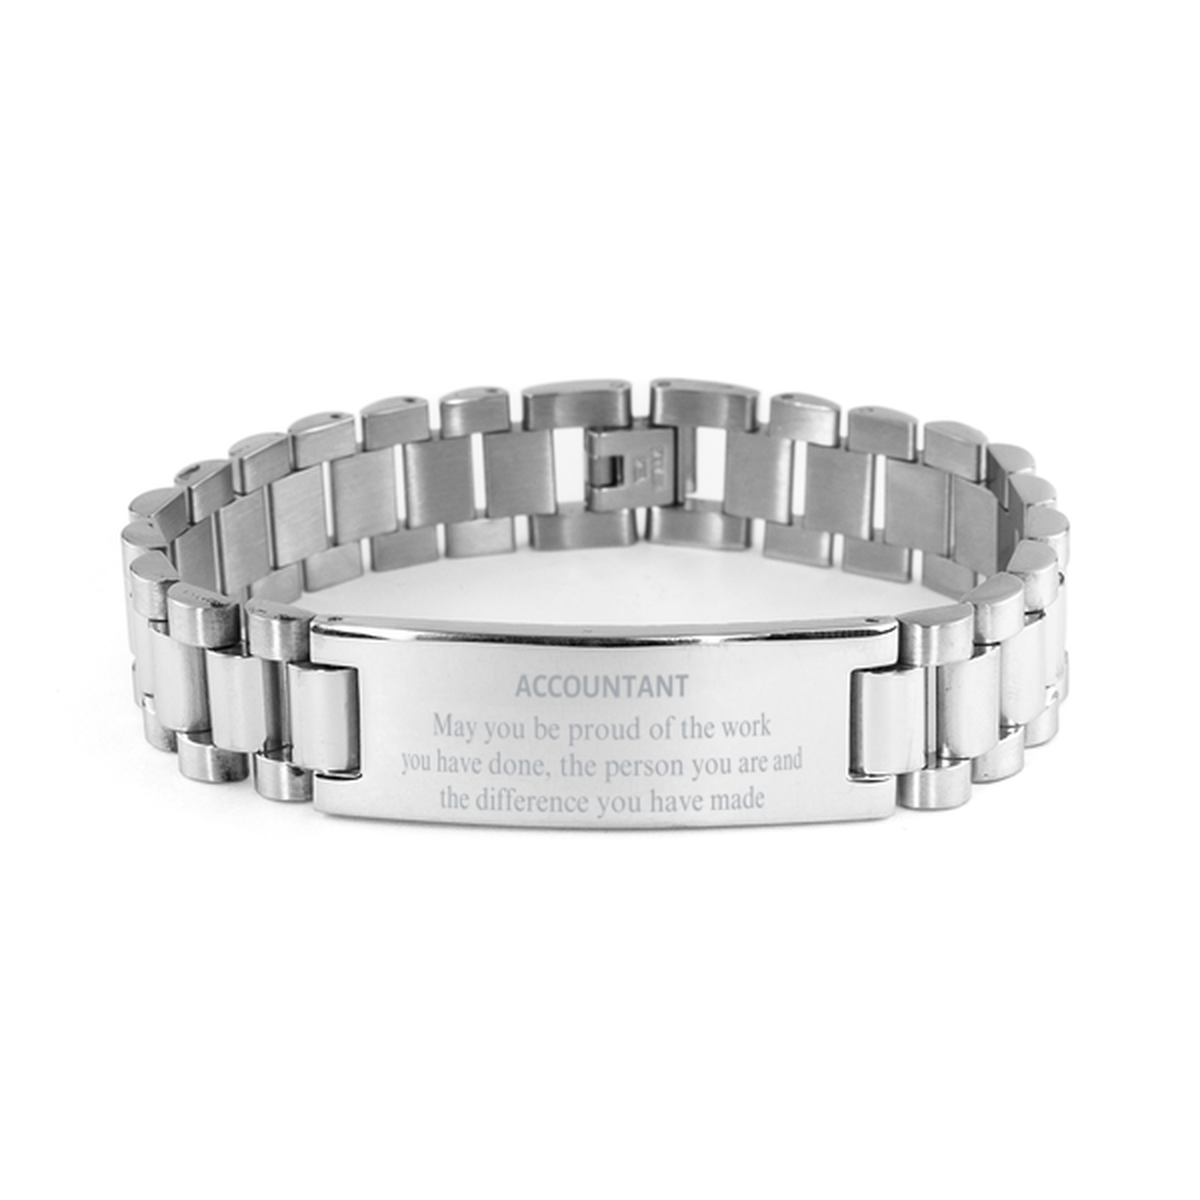 Accountant May you be proud of the work you have done, Retirement Accountant Ladder Stainless Steel Bracelet for Colleague Appreciation Gifts Amazing for Accountant